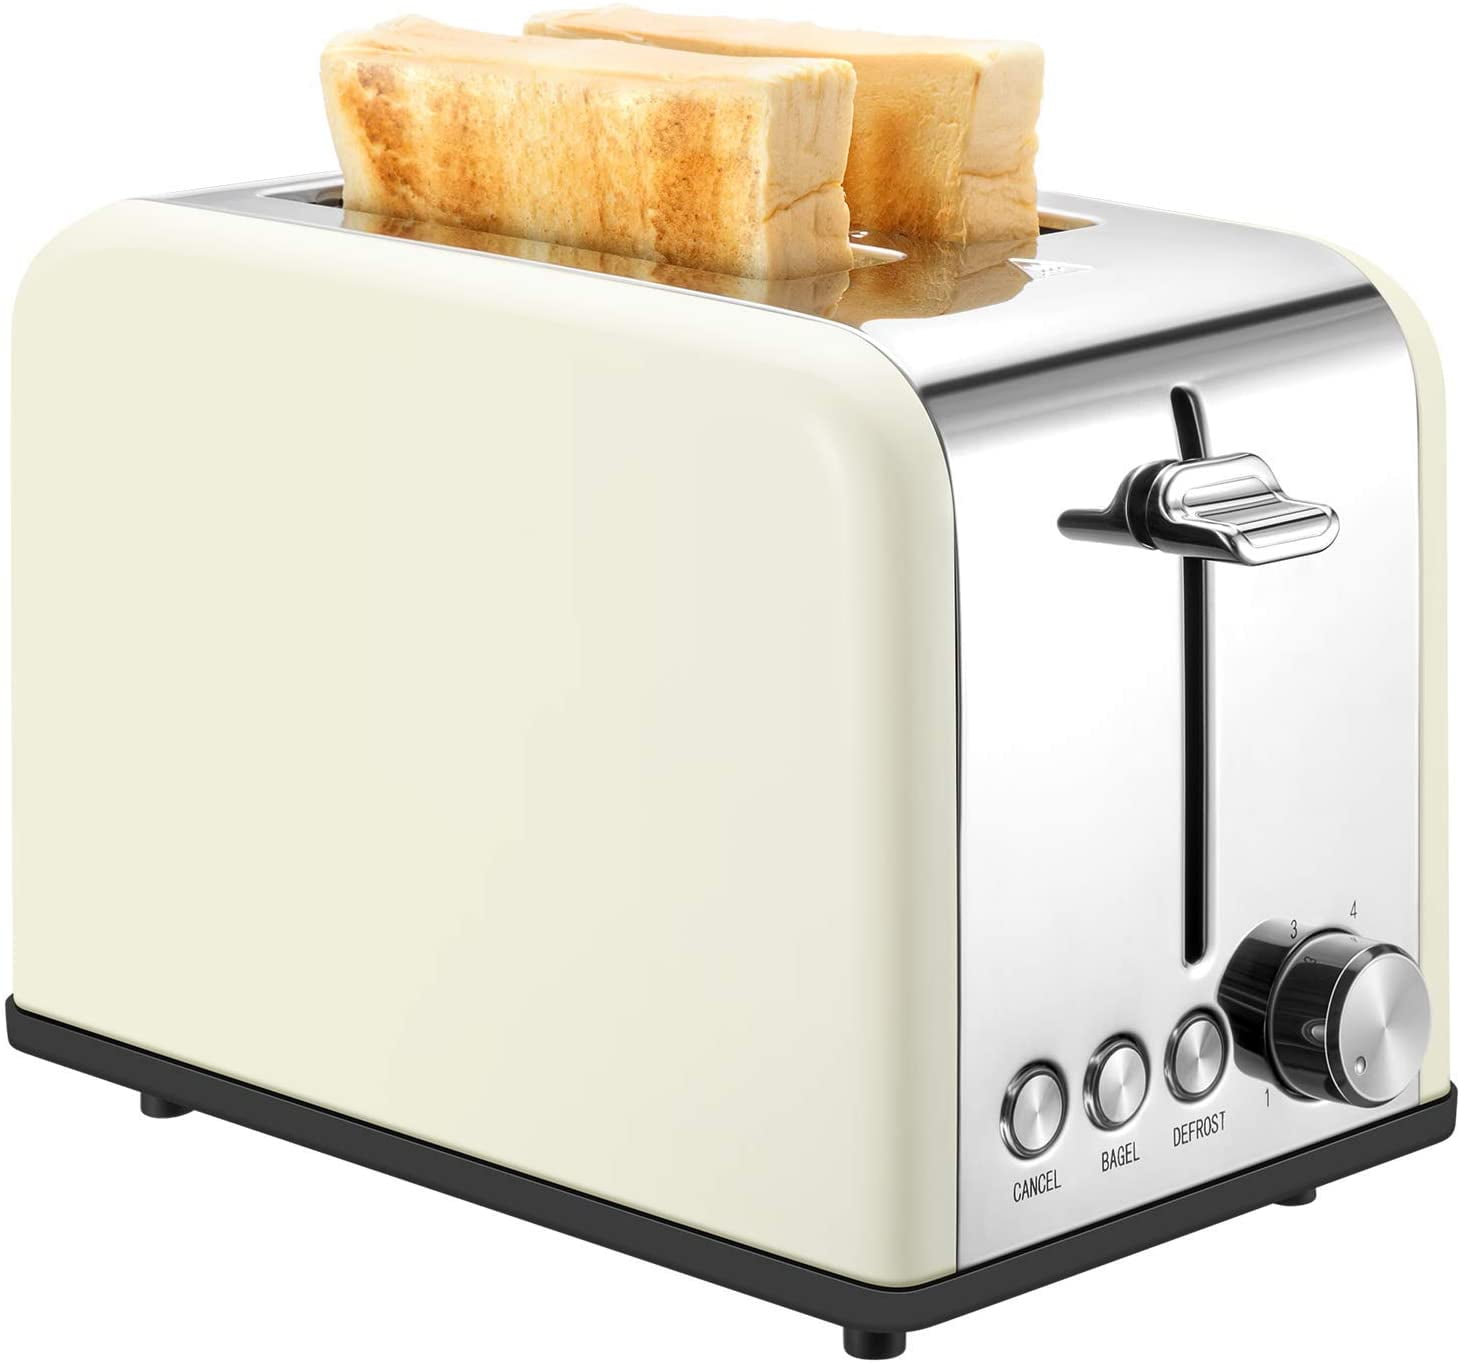 Toaster 2 Slice, Retro Small Toaster with Bagel, Cancel, Defrost ...